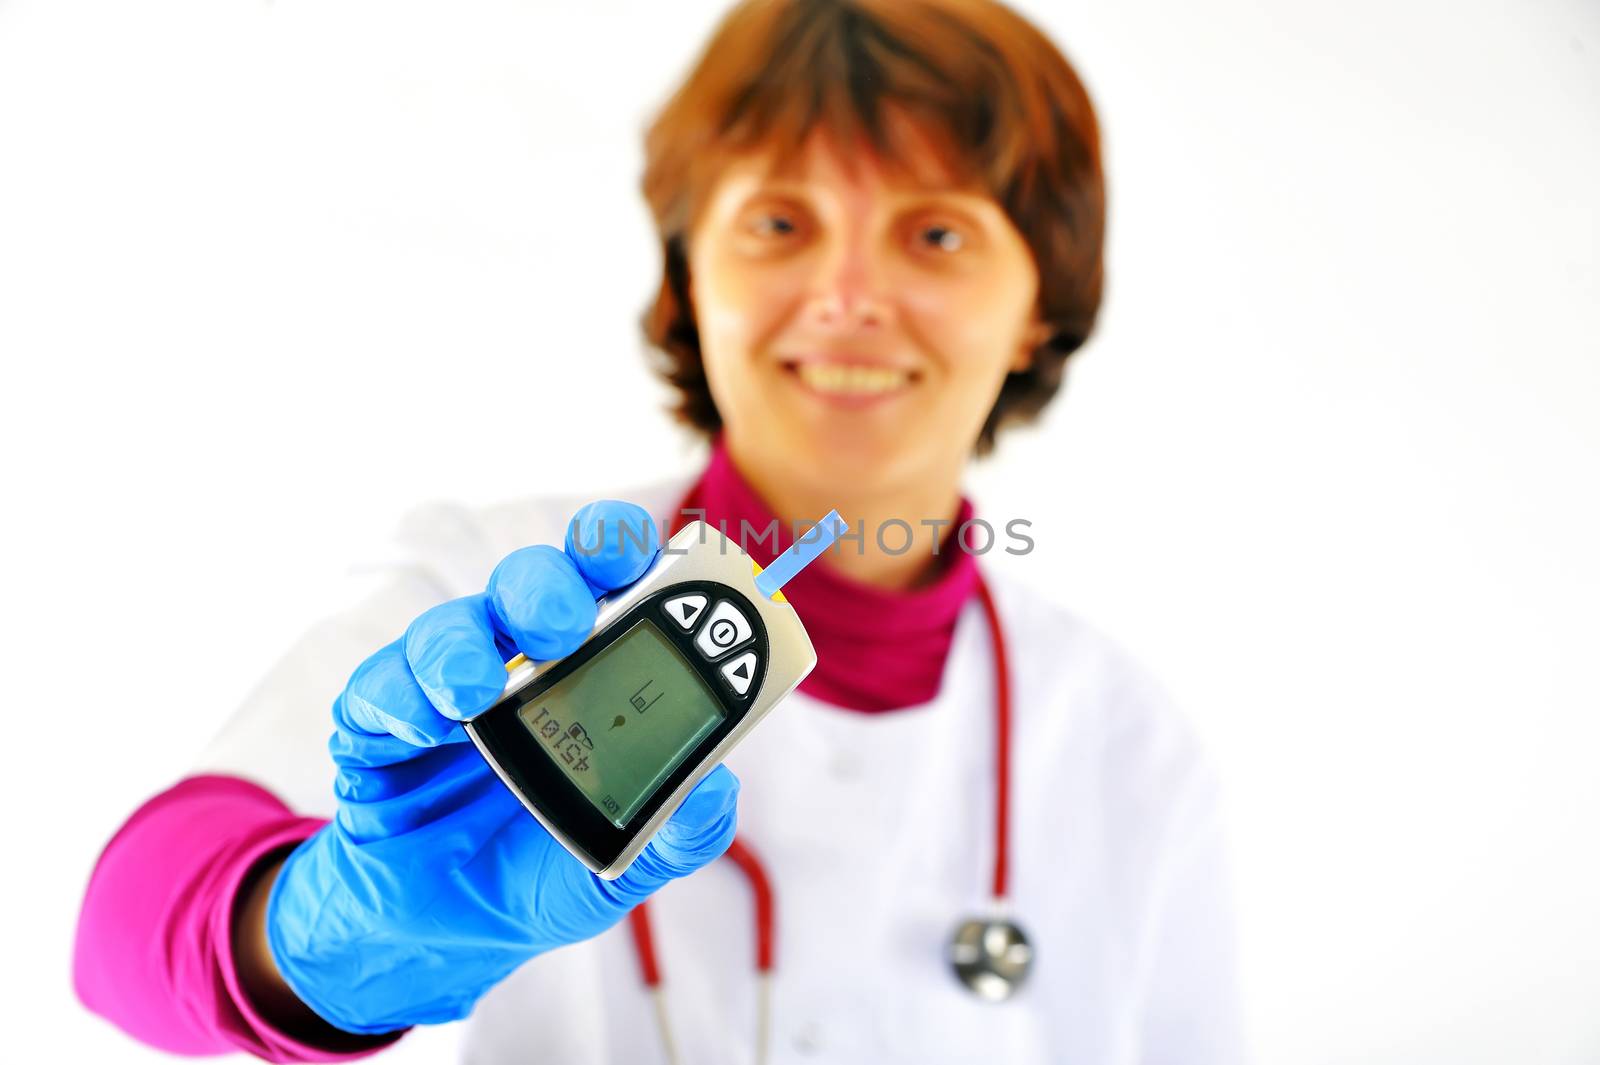 doctor checking diabetic's blood sugar  by mady70